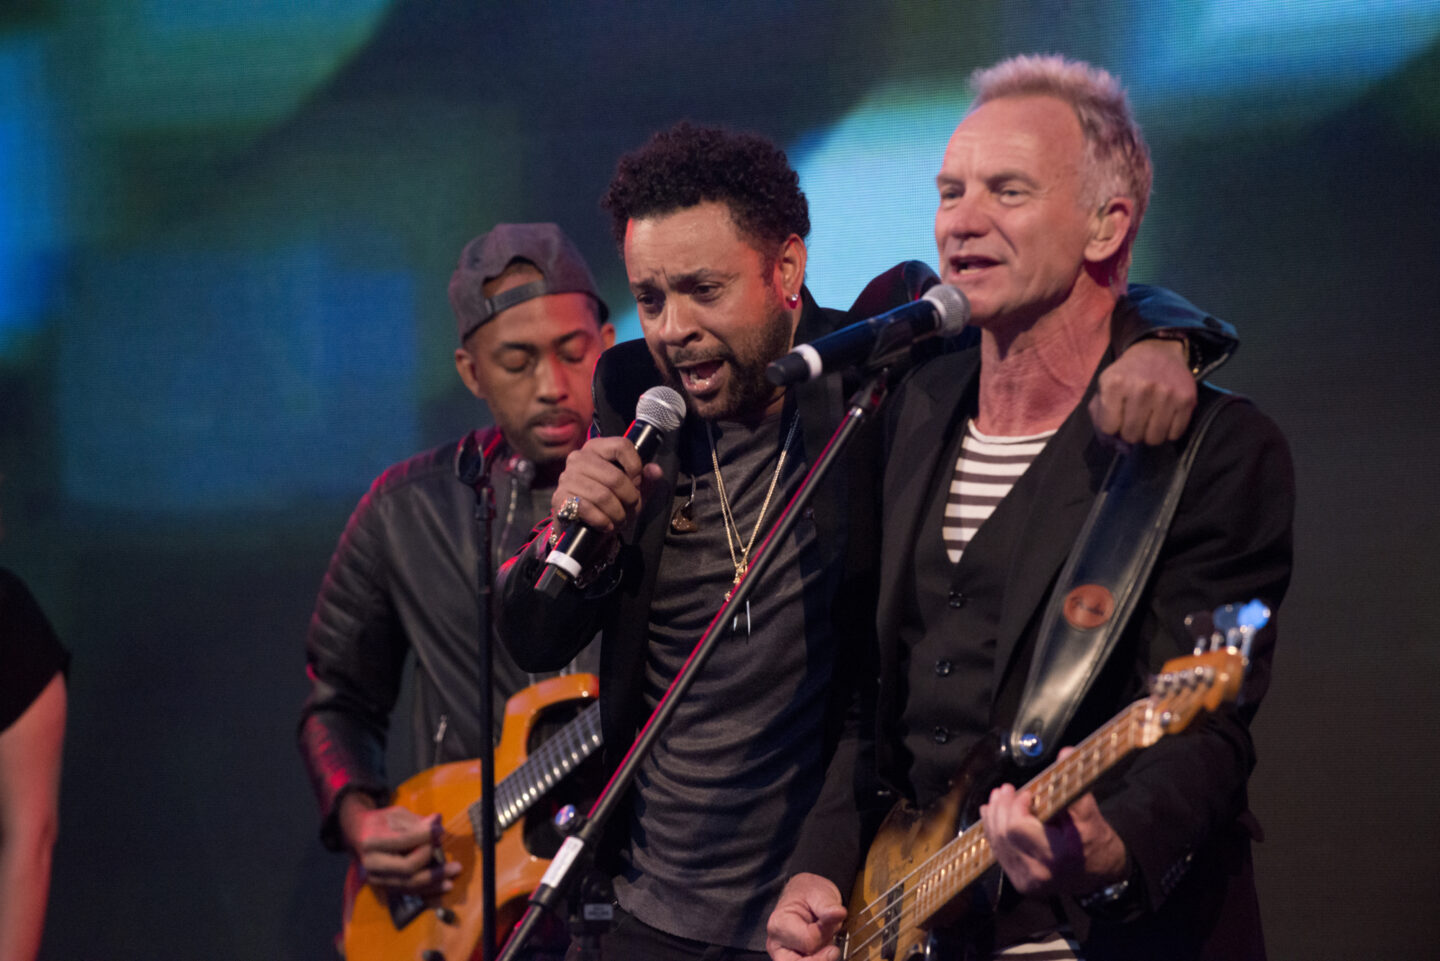 Musicians Sting and Shaggy sing onstage together